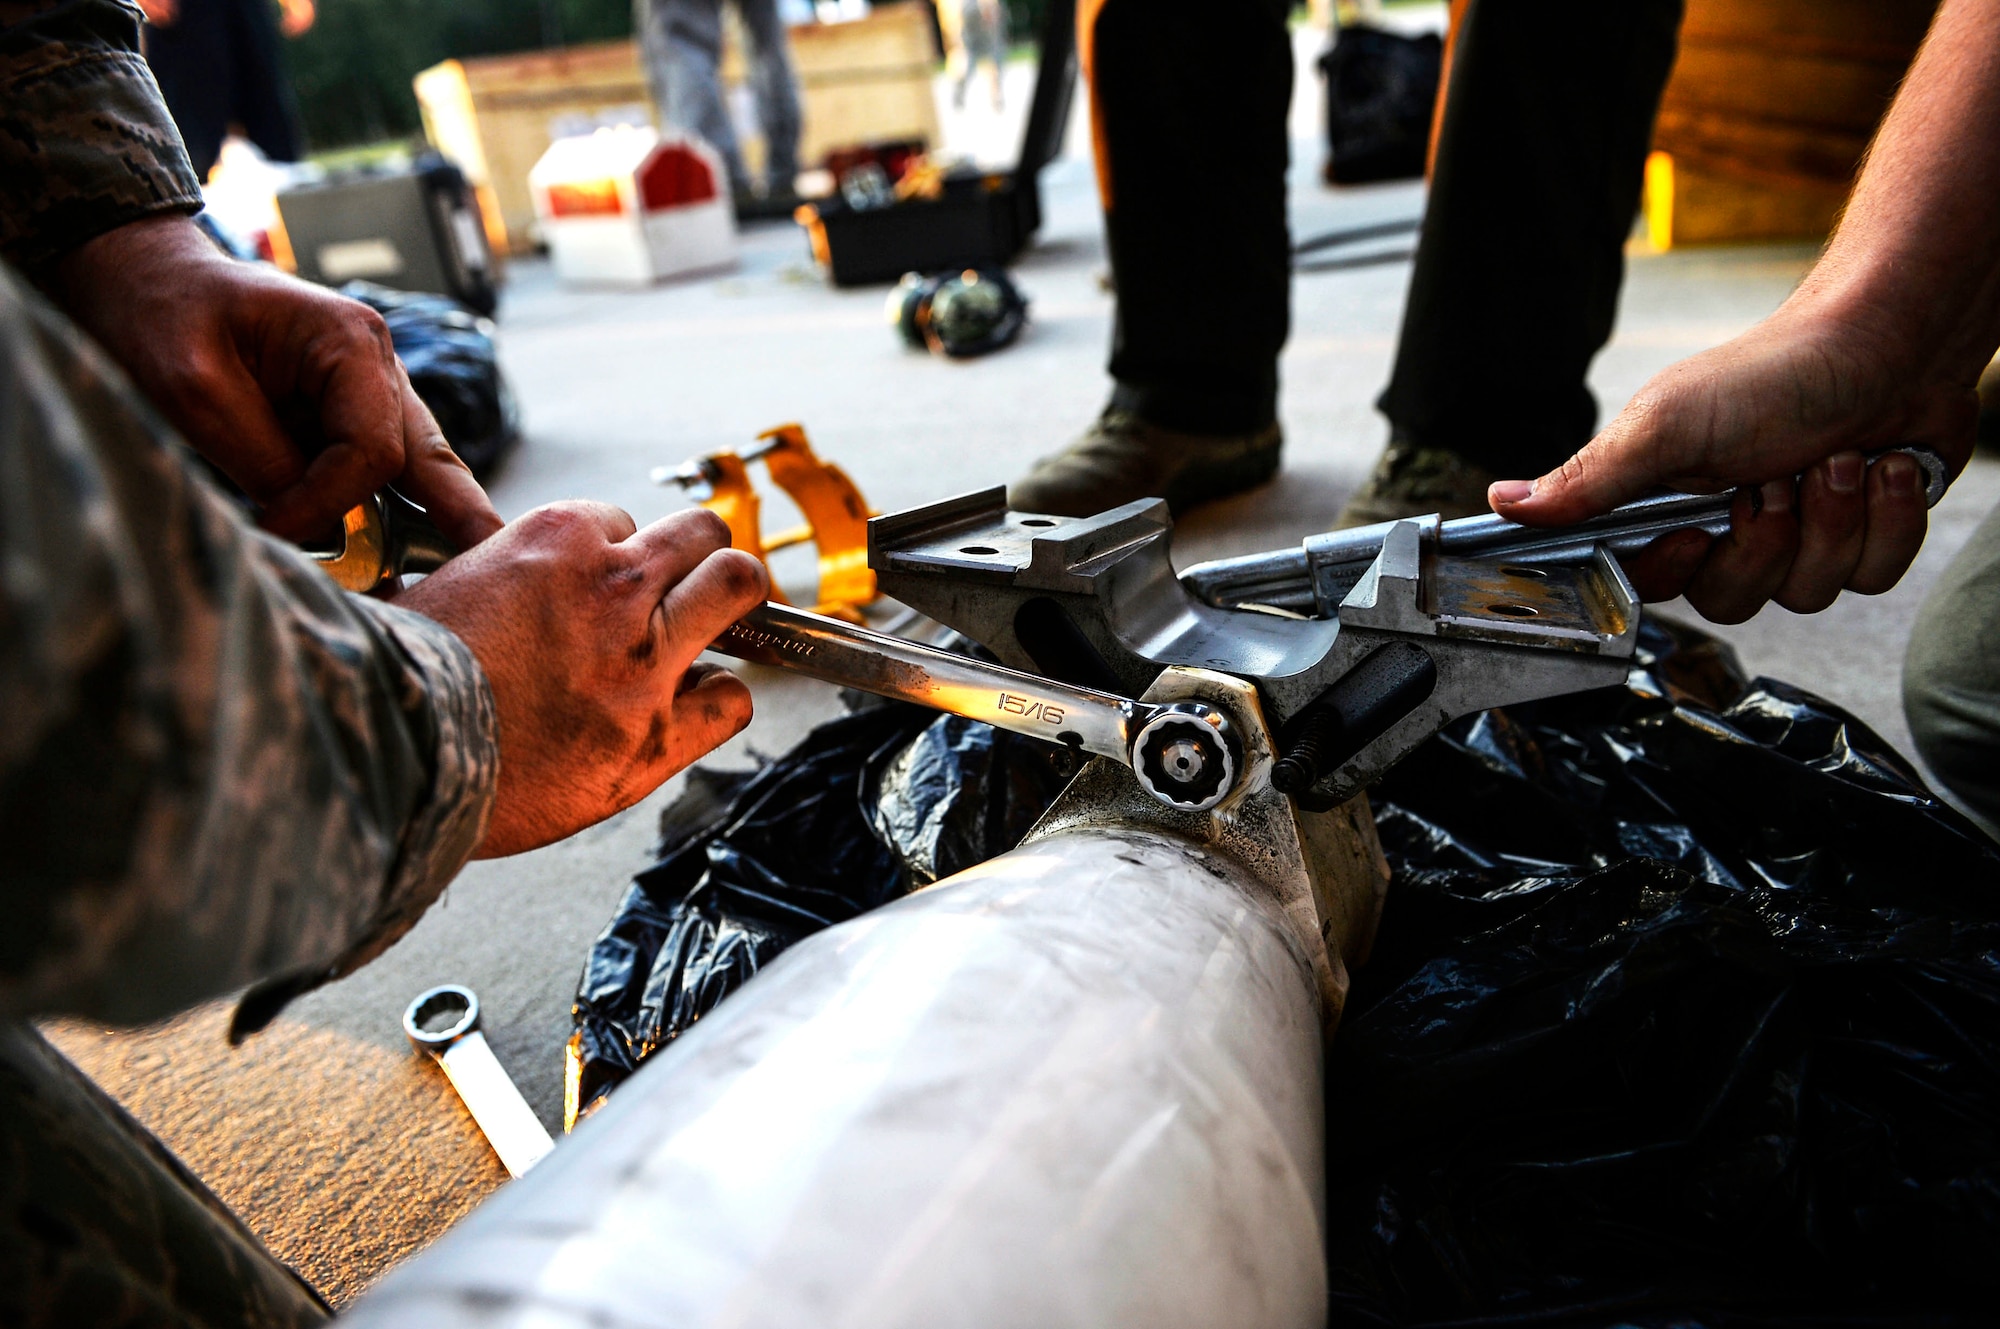 U.S. Airmen assigned to the 86th Aircraft Maintenance Squadron secure bolts on the strut of a C-130J Super Hercules on Powidz Air Base, Poland, Aug. 3, 2018. Maintenance Airmen are responsible for ensuring the operational and structural integrity of aircraft. (U.S. Air Force photo by Senior Airman Joshua Magbanua)